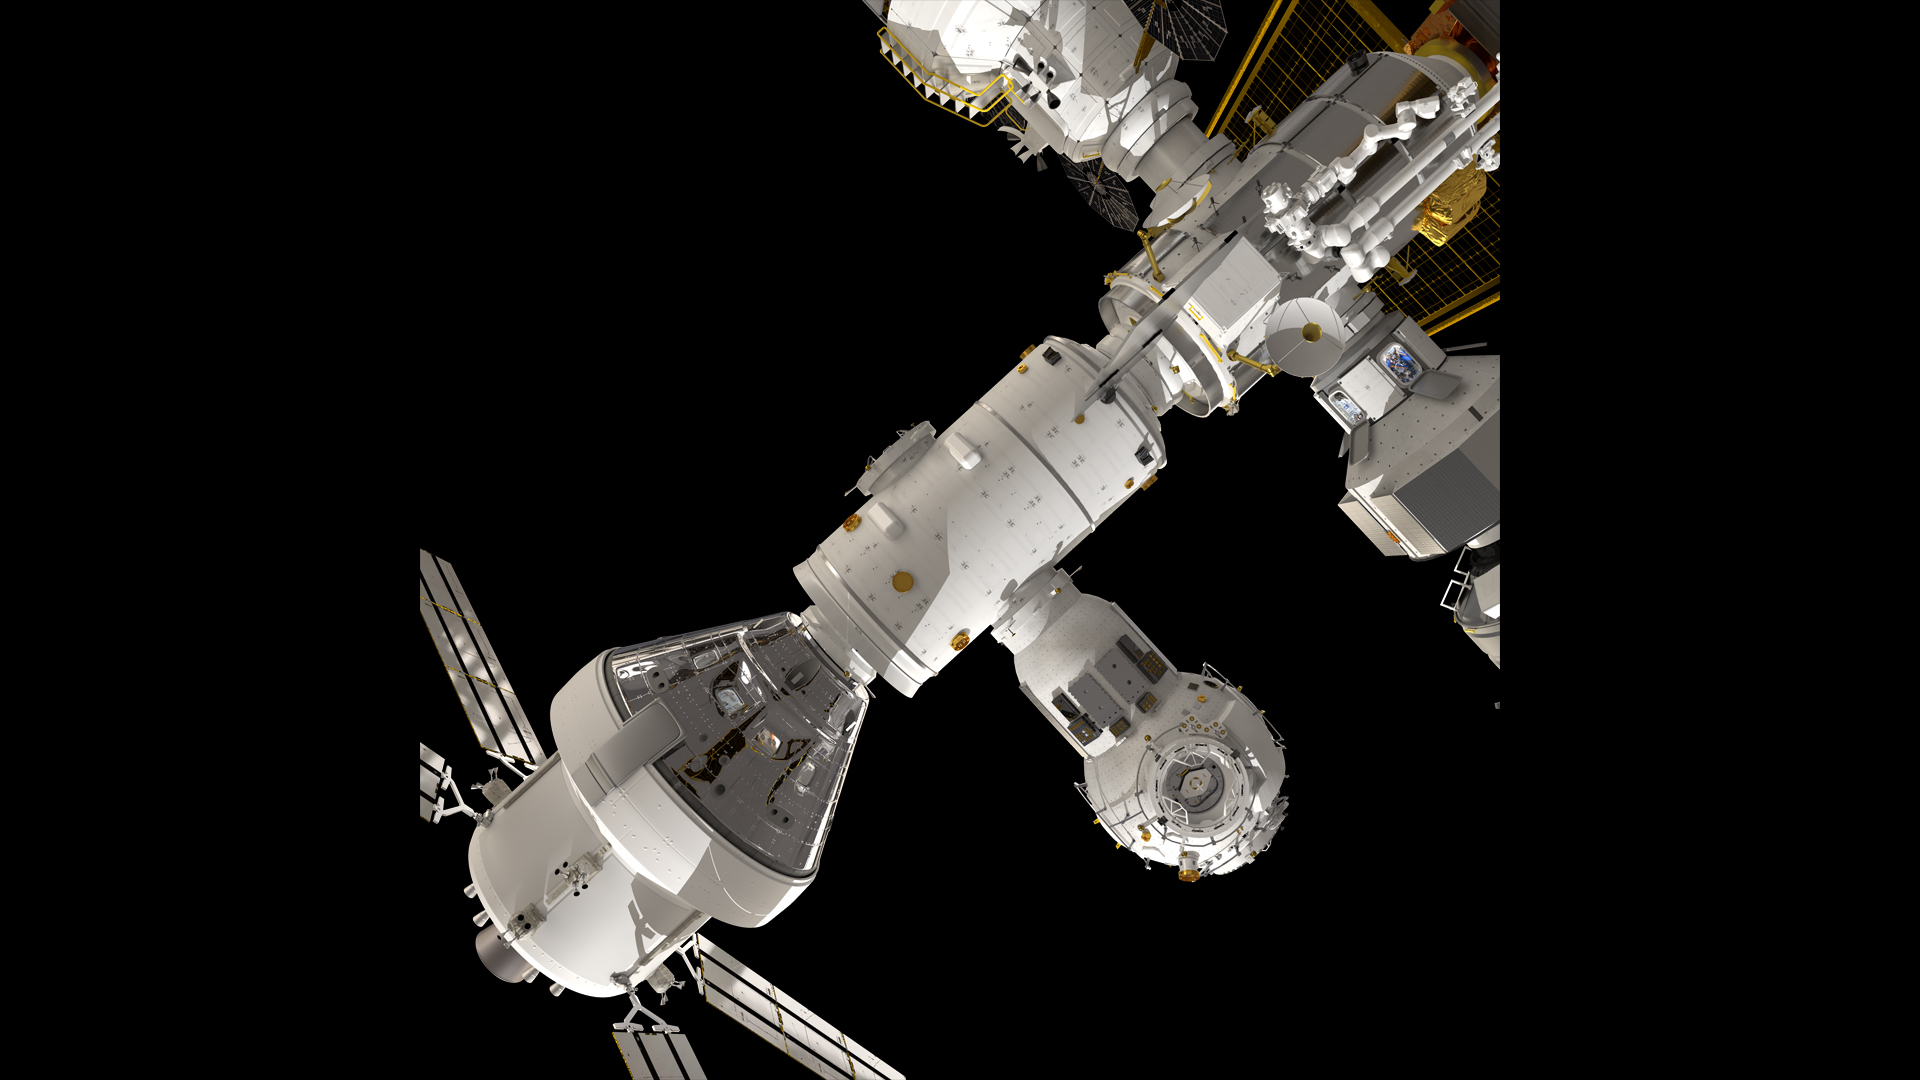 A visualization of the crew segment of the Lunar Gateway station.